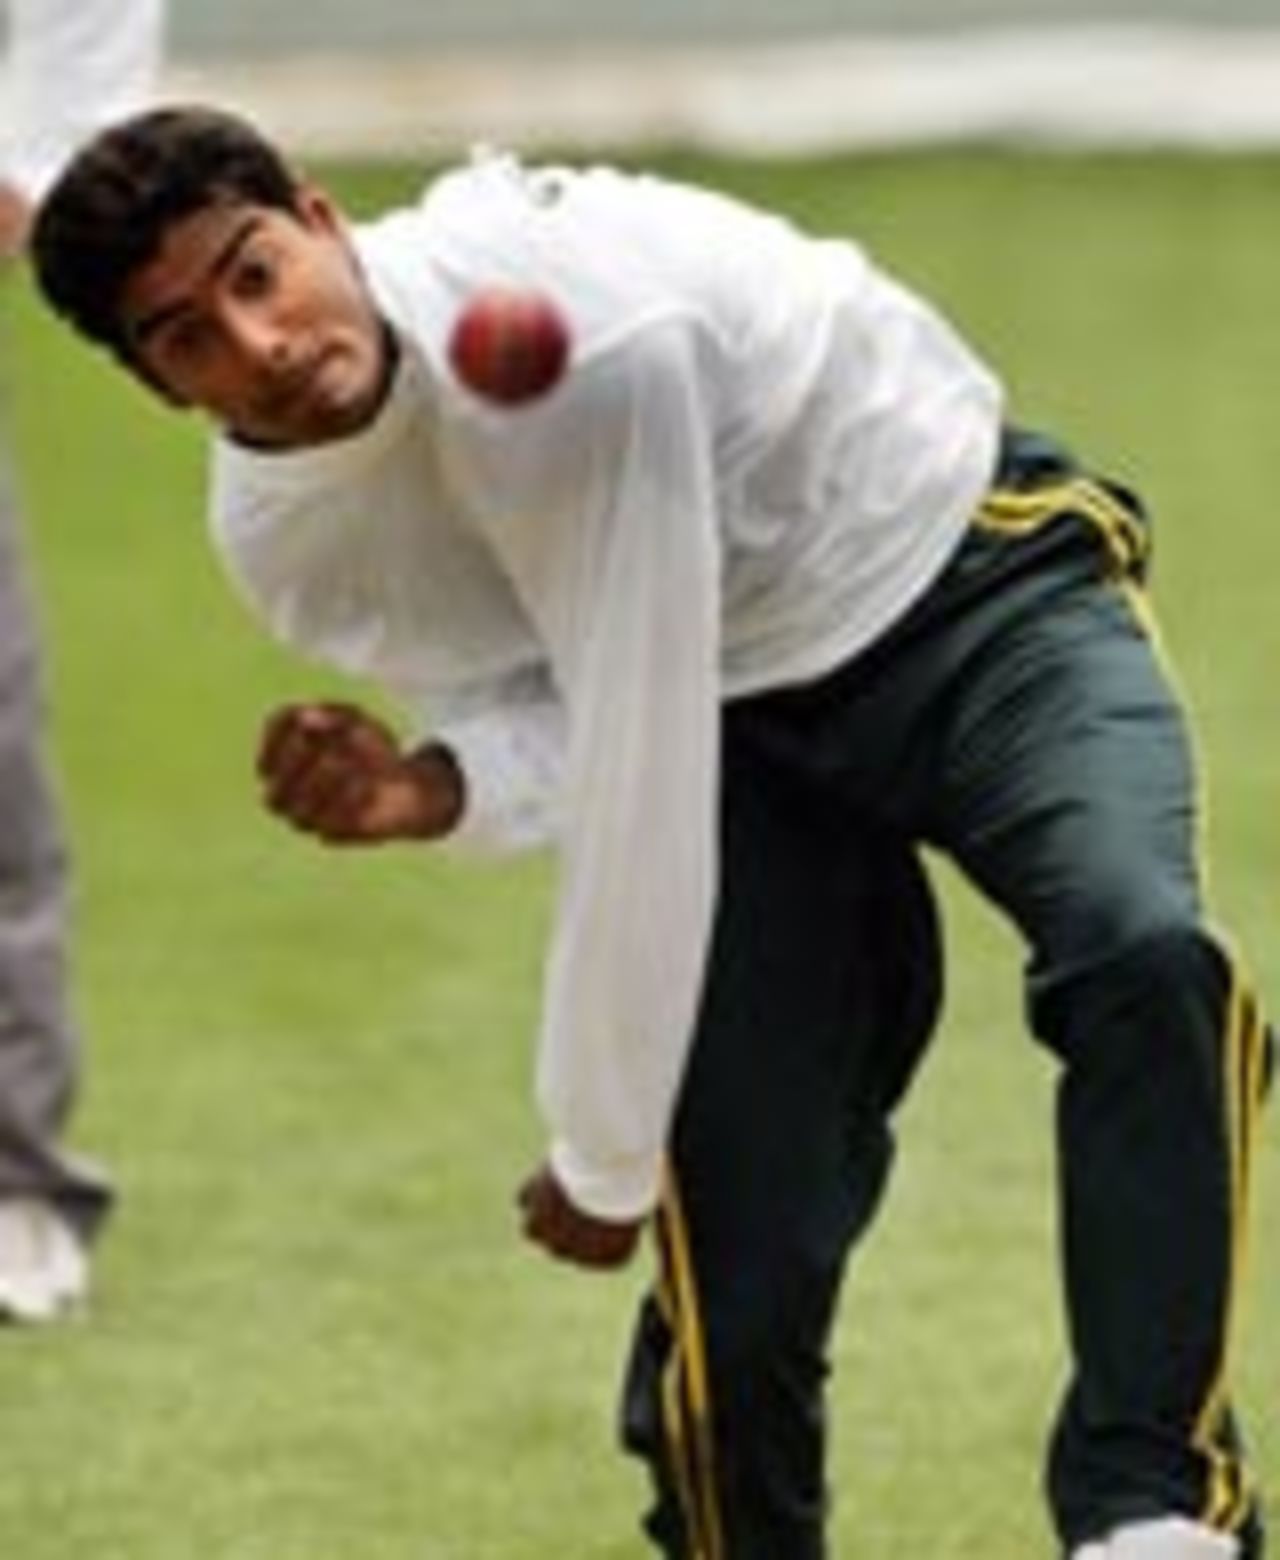 Mohammad Khalil bowling in the nets, January 1, 2005